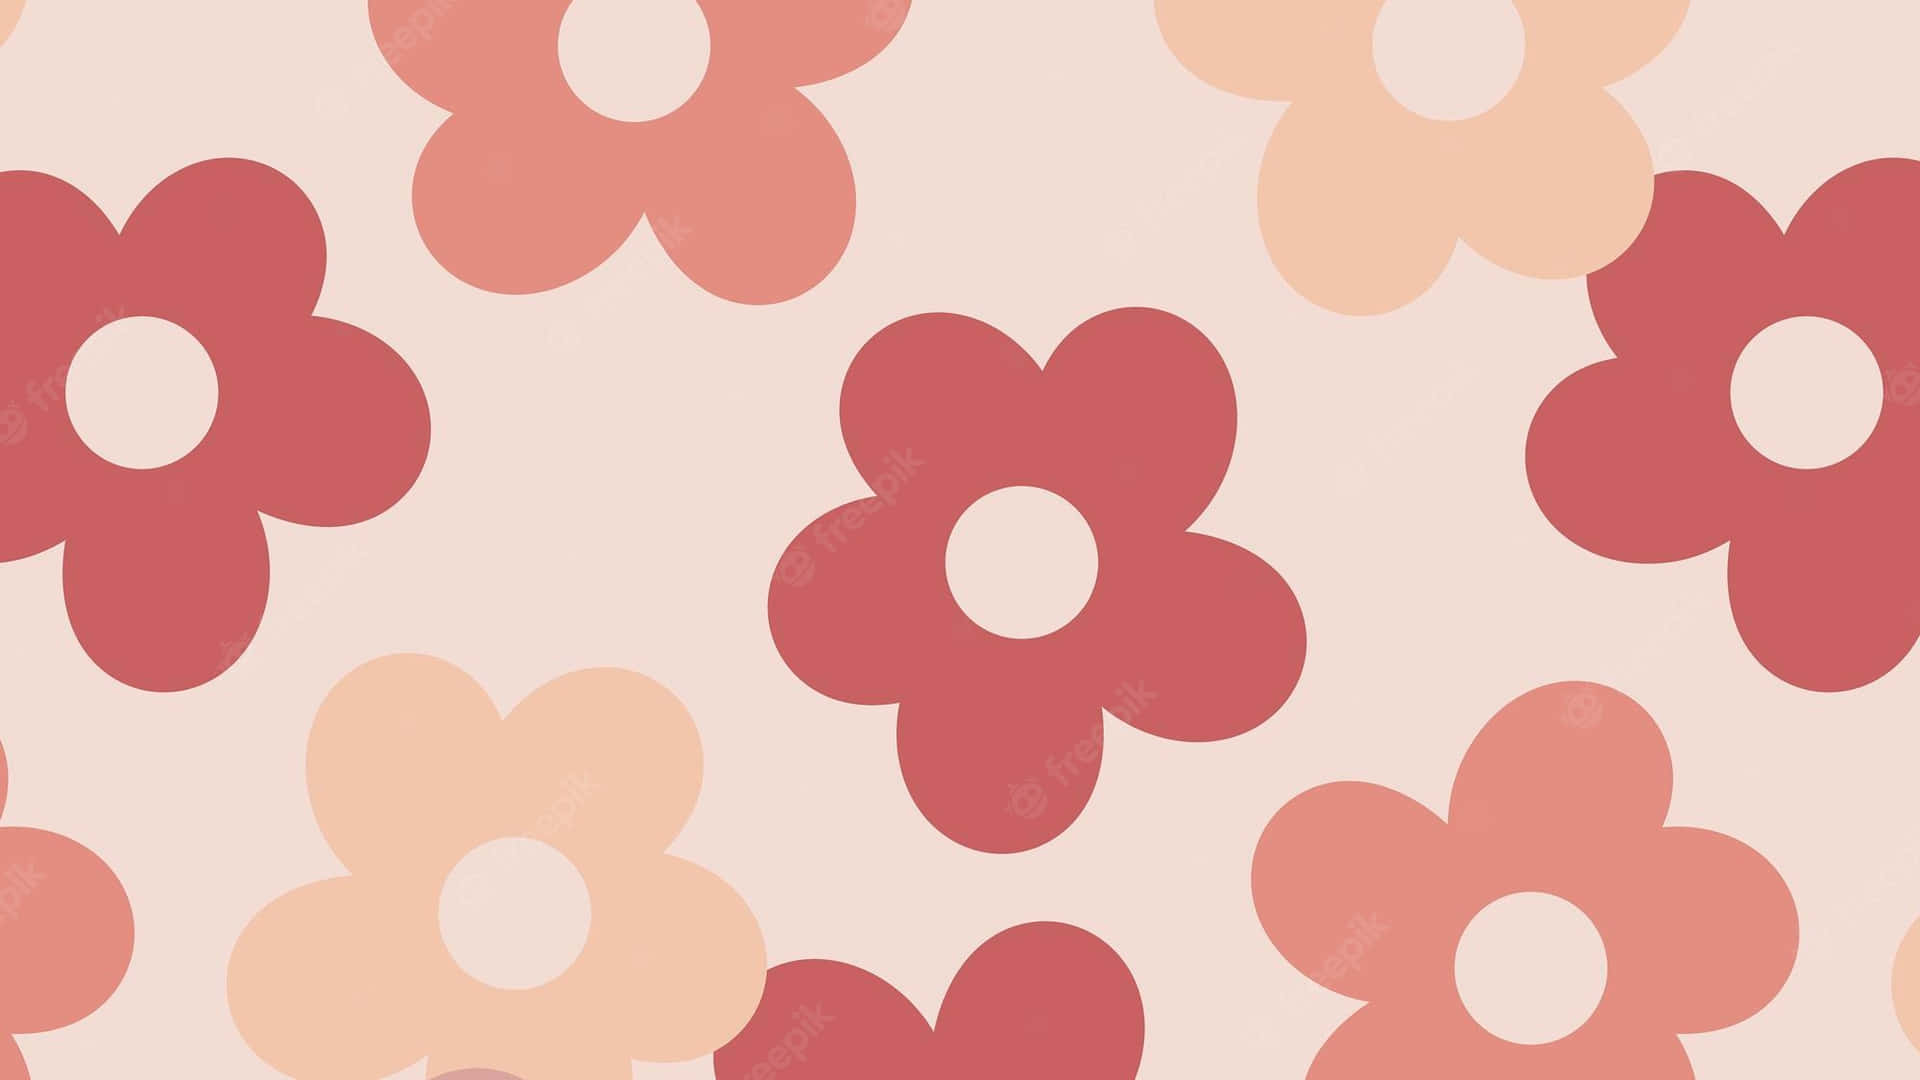 A Pink And Beige Flower Pattern Wallpaper